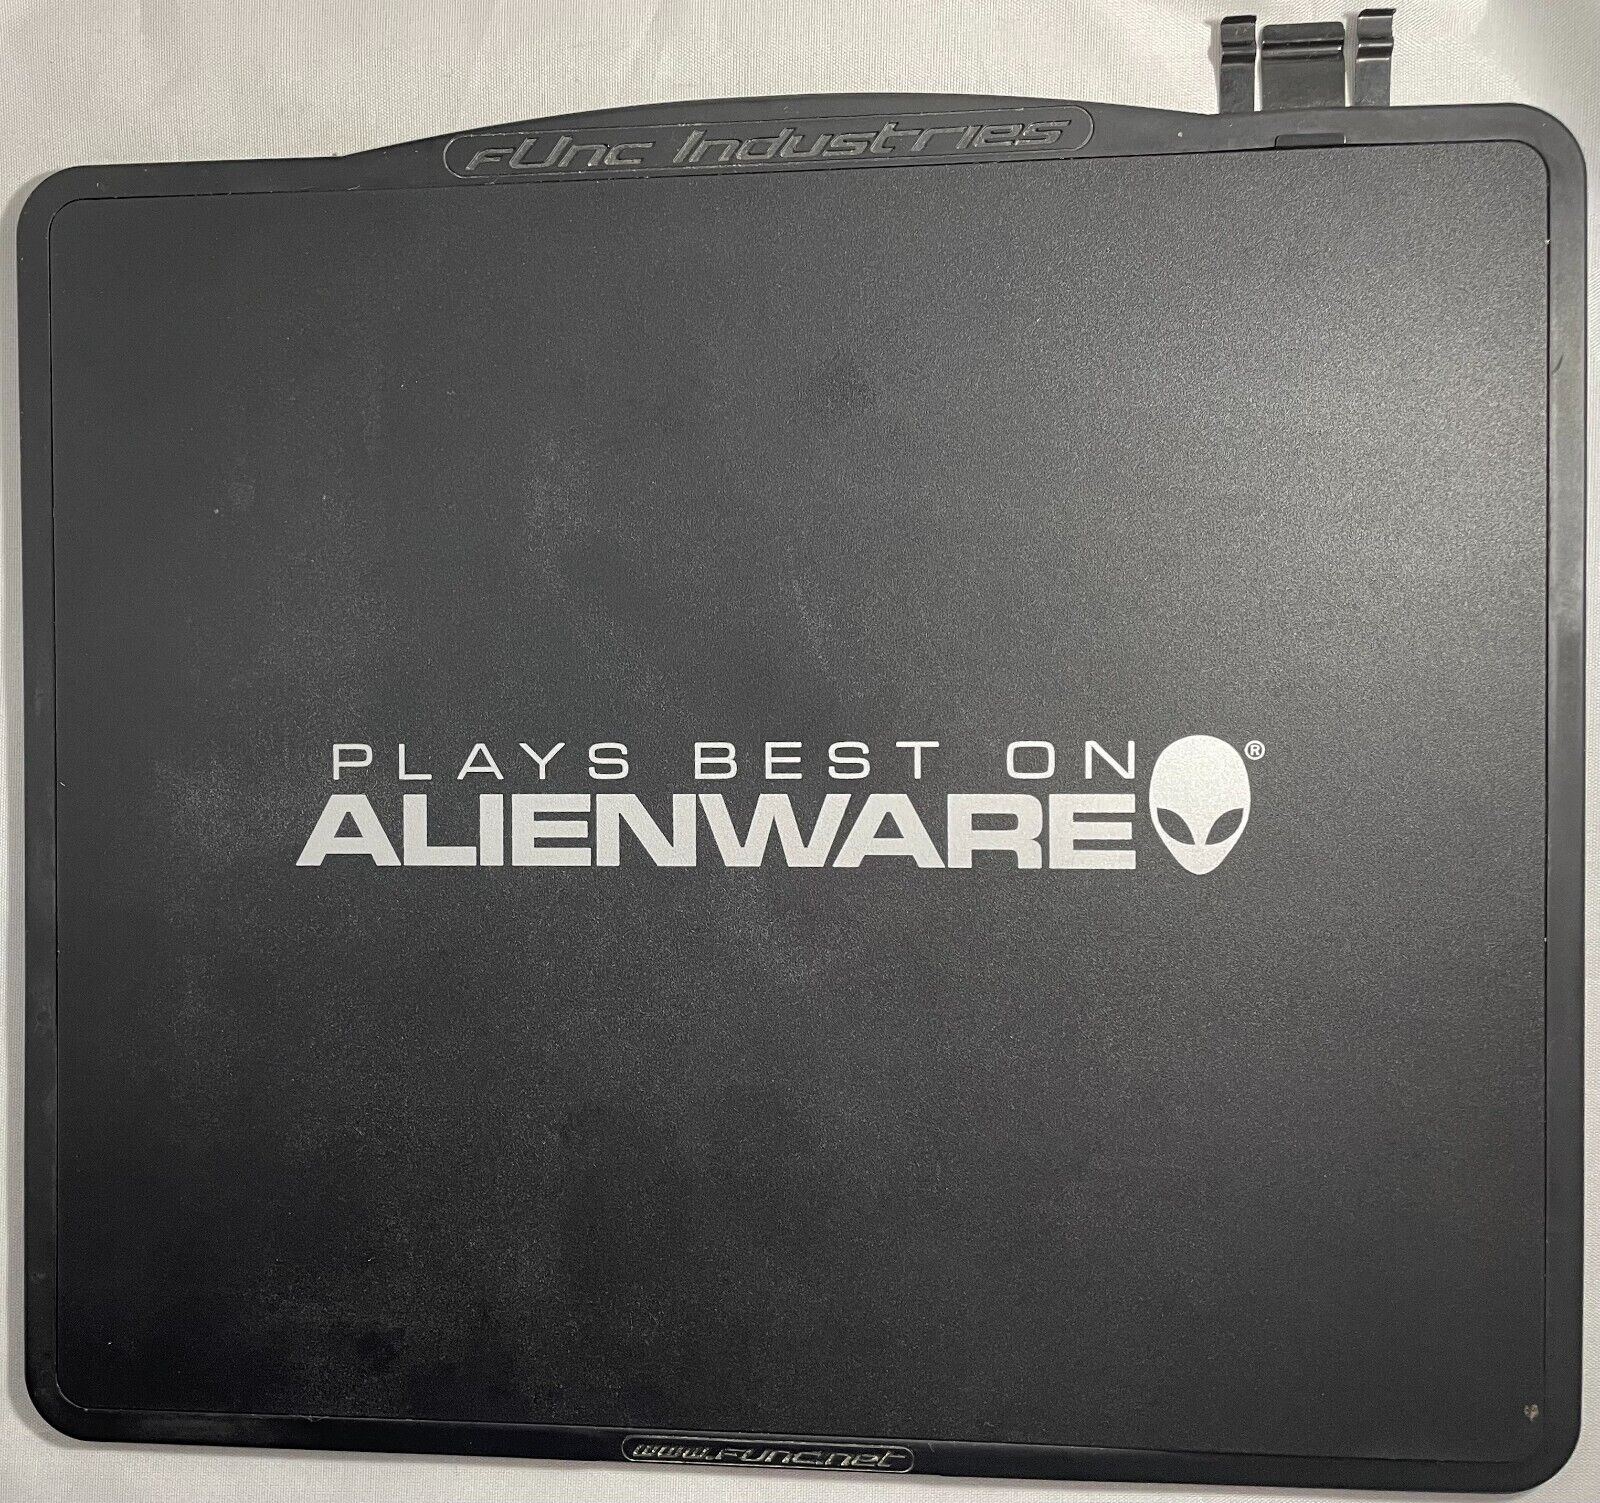 Alienware fUnc Ind. sUrface 1030 Mousing Surface Mousepad VERY RARE HARD TO FIND